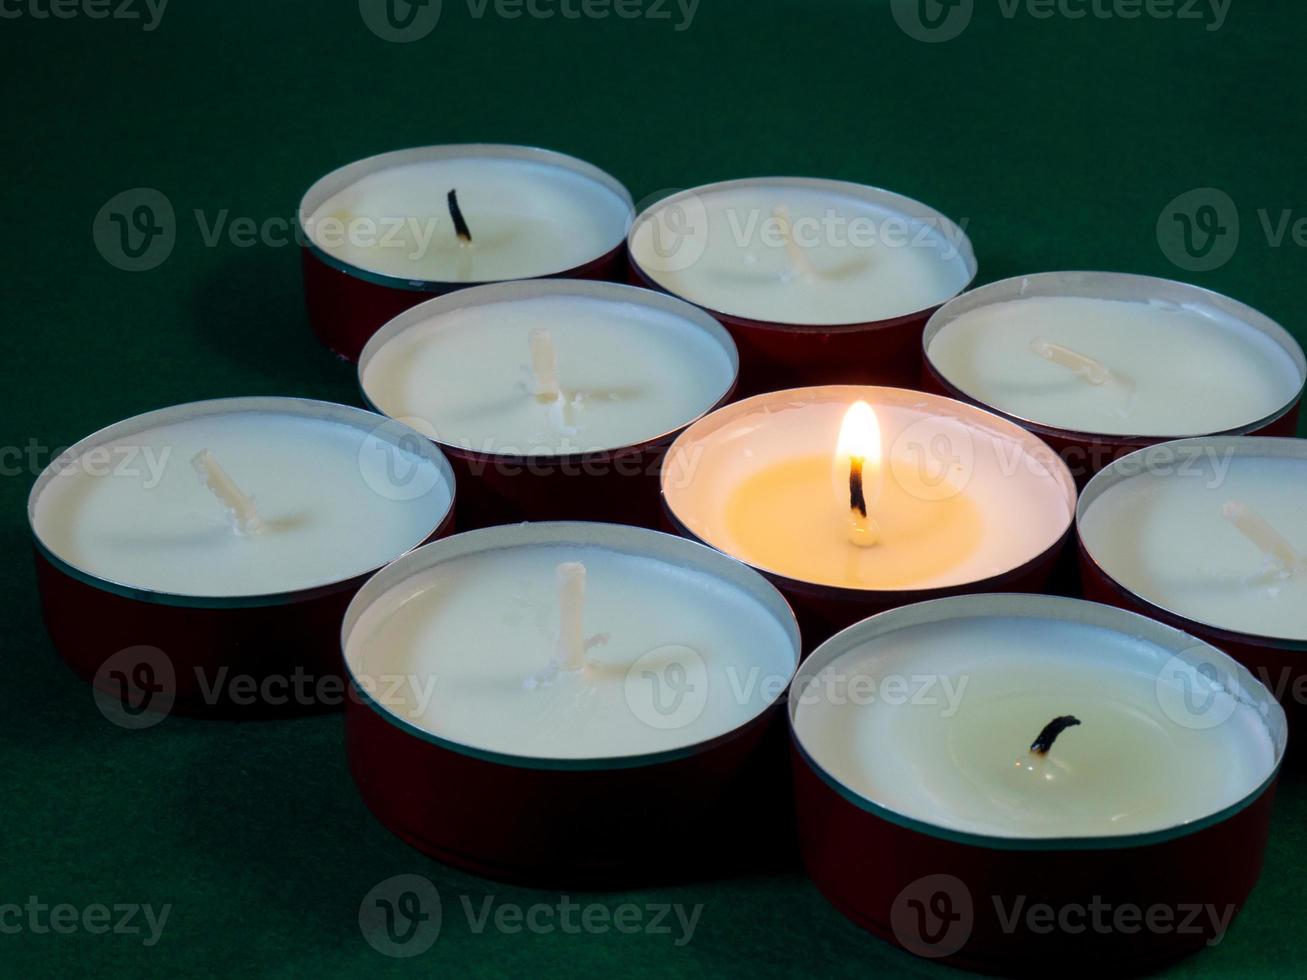 https://static.vecteezy.com/system/resources/previews/012/813/169/non_2x/short-candles-are-burning-on-a-green-surface-lots-of-small-candles-not-all-candles-are-lit-photo.jpg